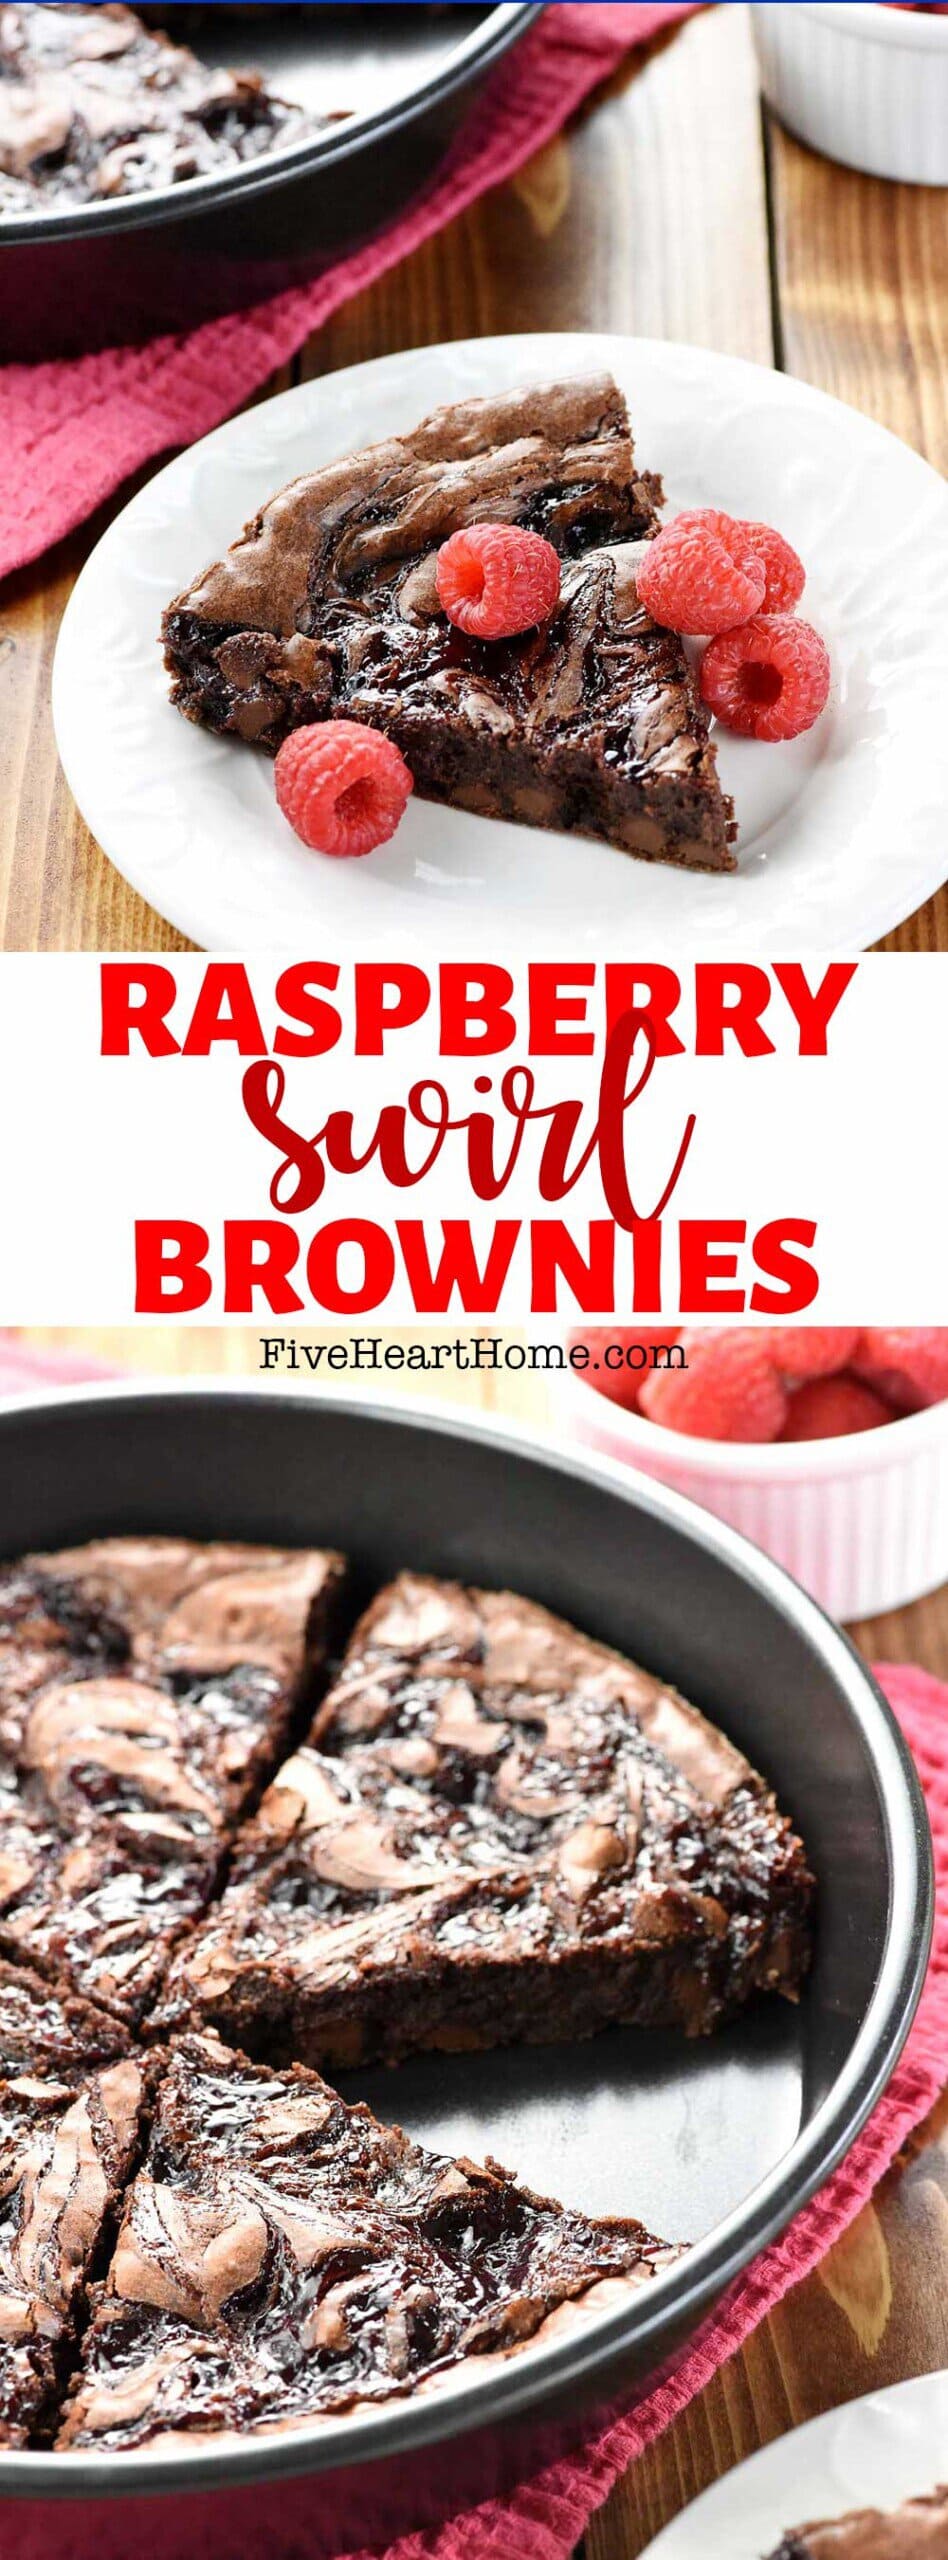 Raspberry Swirl Brownies ~ fudgy brownies are studded with chocolate chips, topped with raspberry preserves, and sliced into wedges in this rich, decadent dessert, perfect as a Valentine's Day dessert or for an anytime sweet treat! | FiveHeartHome.com via @fivehearthome